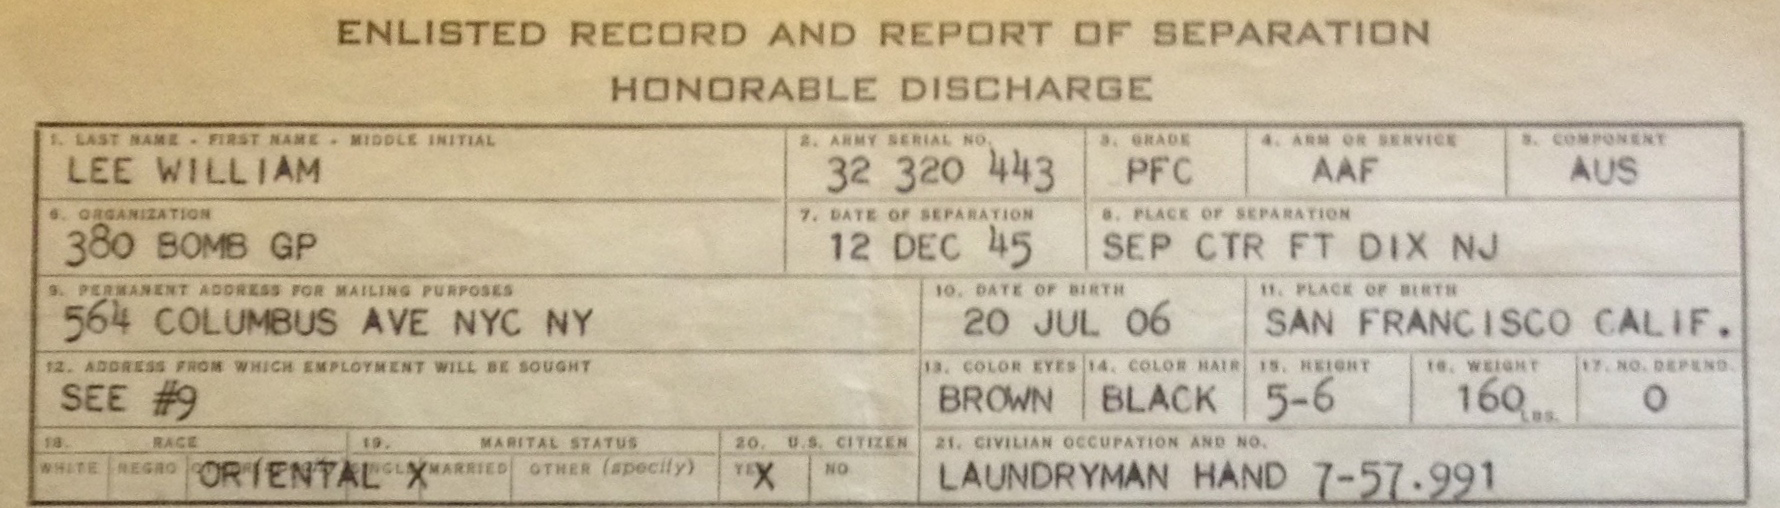 PHOTO: The U.S. military record of honorable discharge for Nick Lee's grandfather, William Lee, after his service in World War II. Asians were then described as "Oriental." -